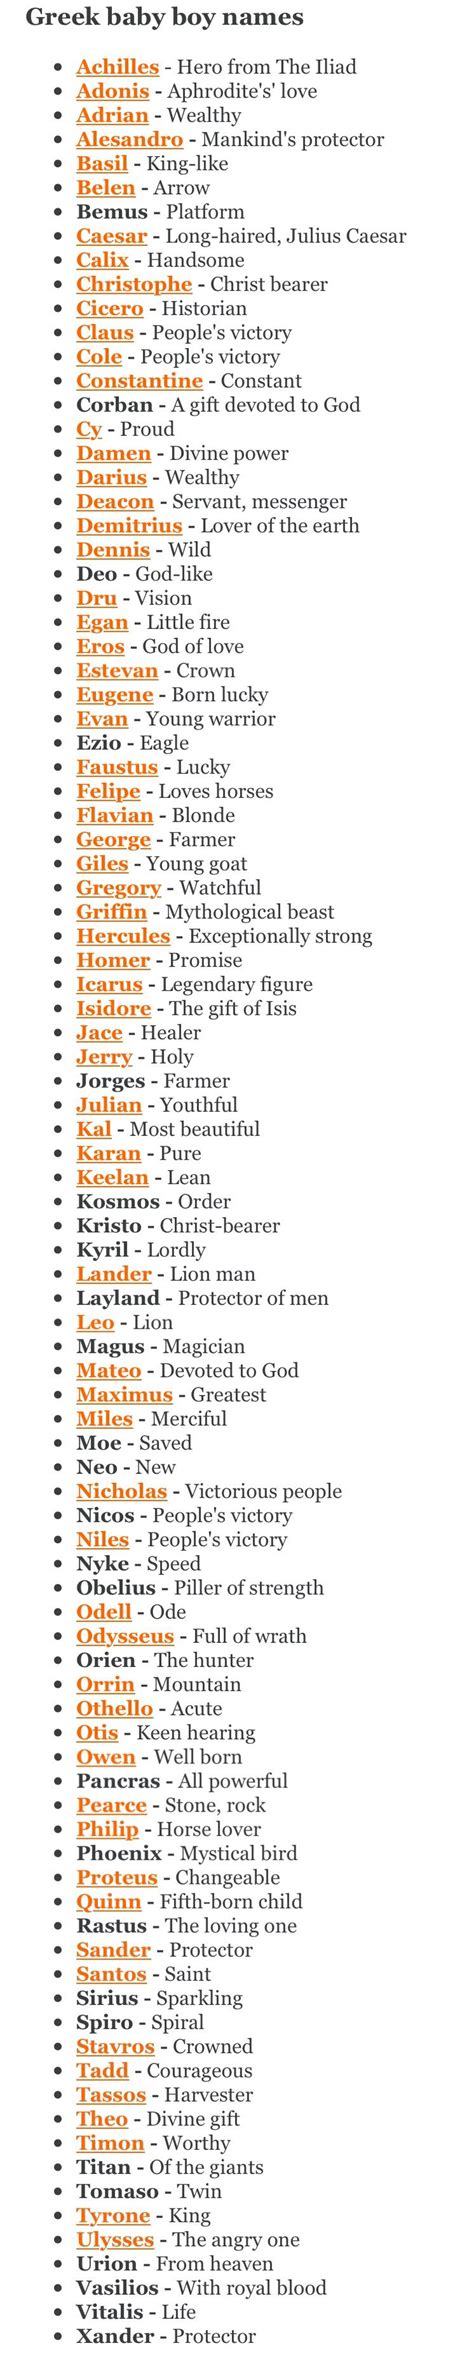 Pin By Caden Crosby On Writing 101 Names Names With Meaning Baby Names